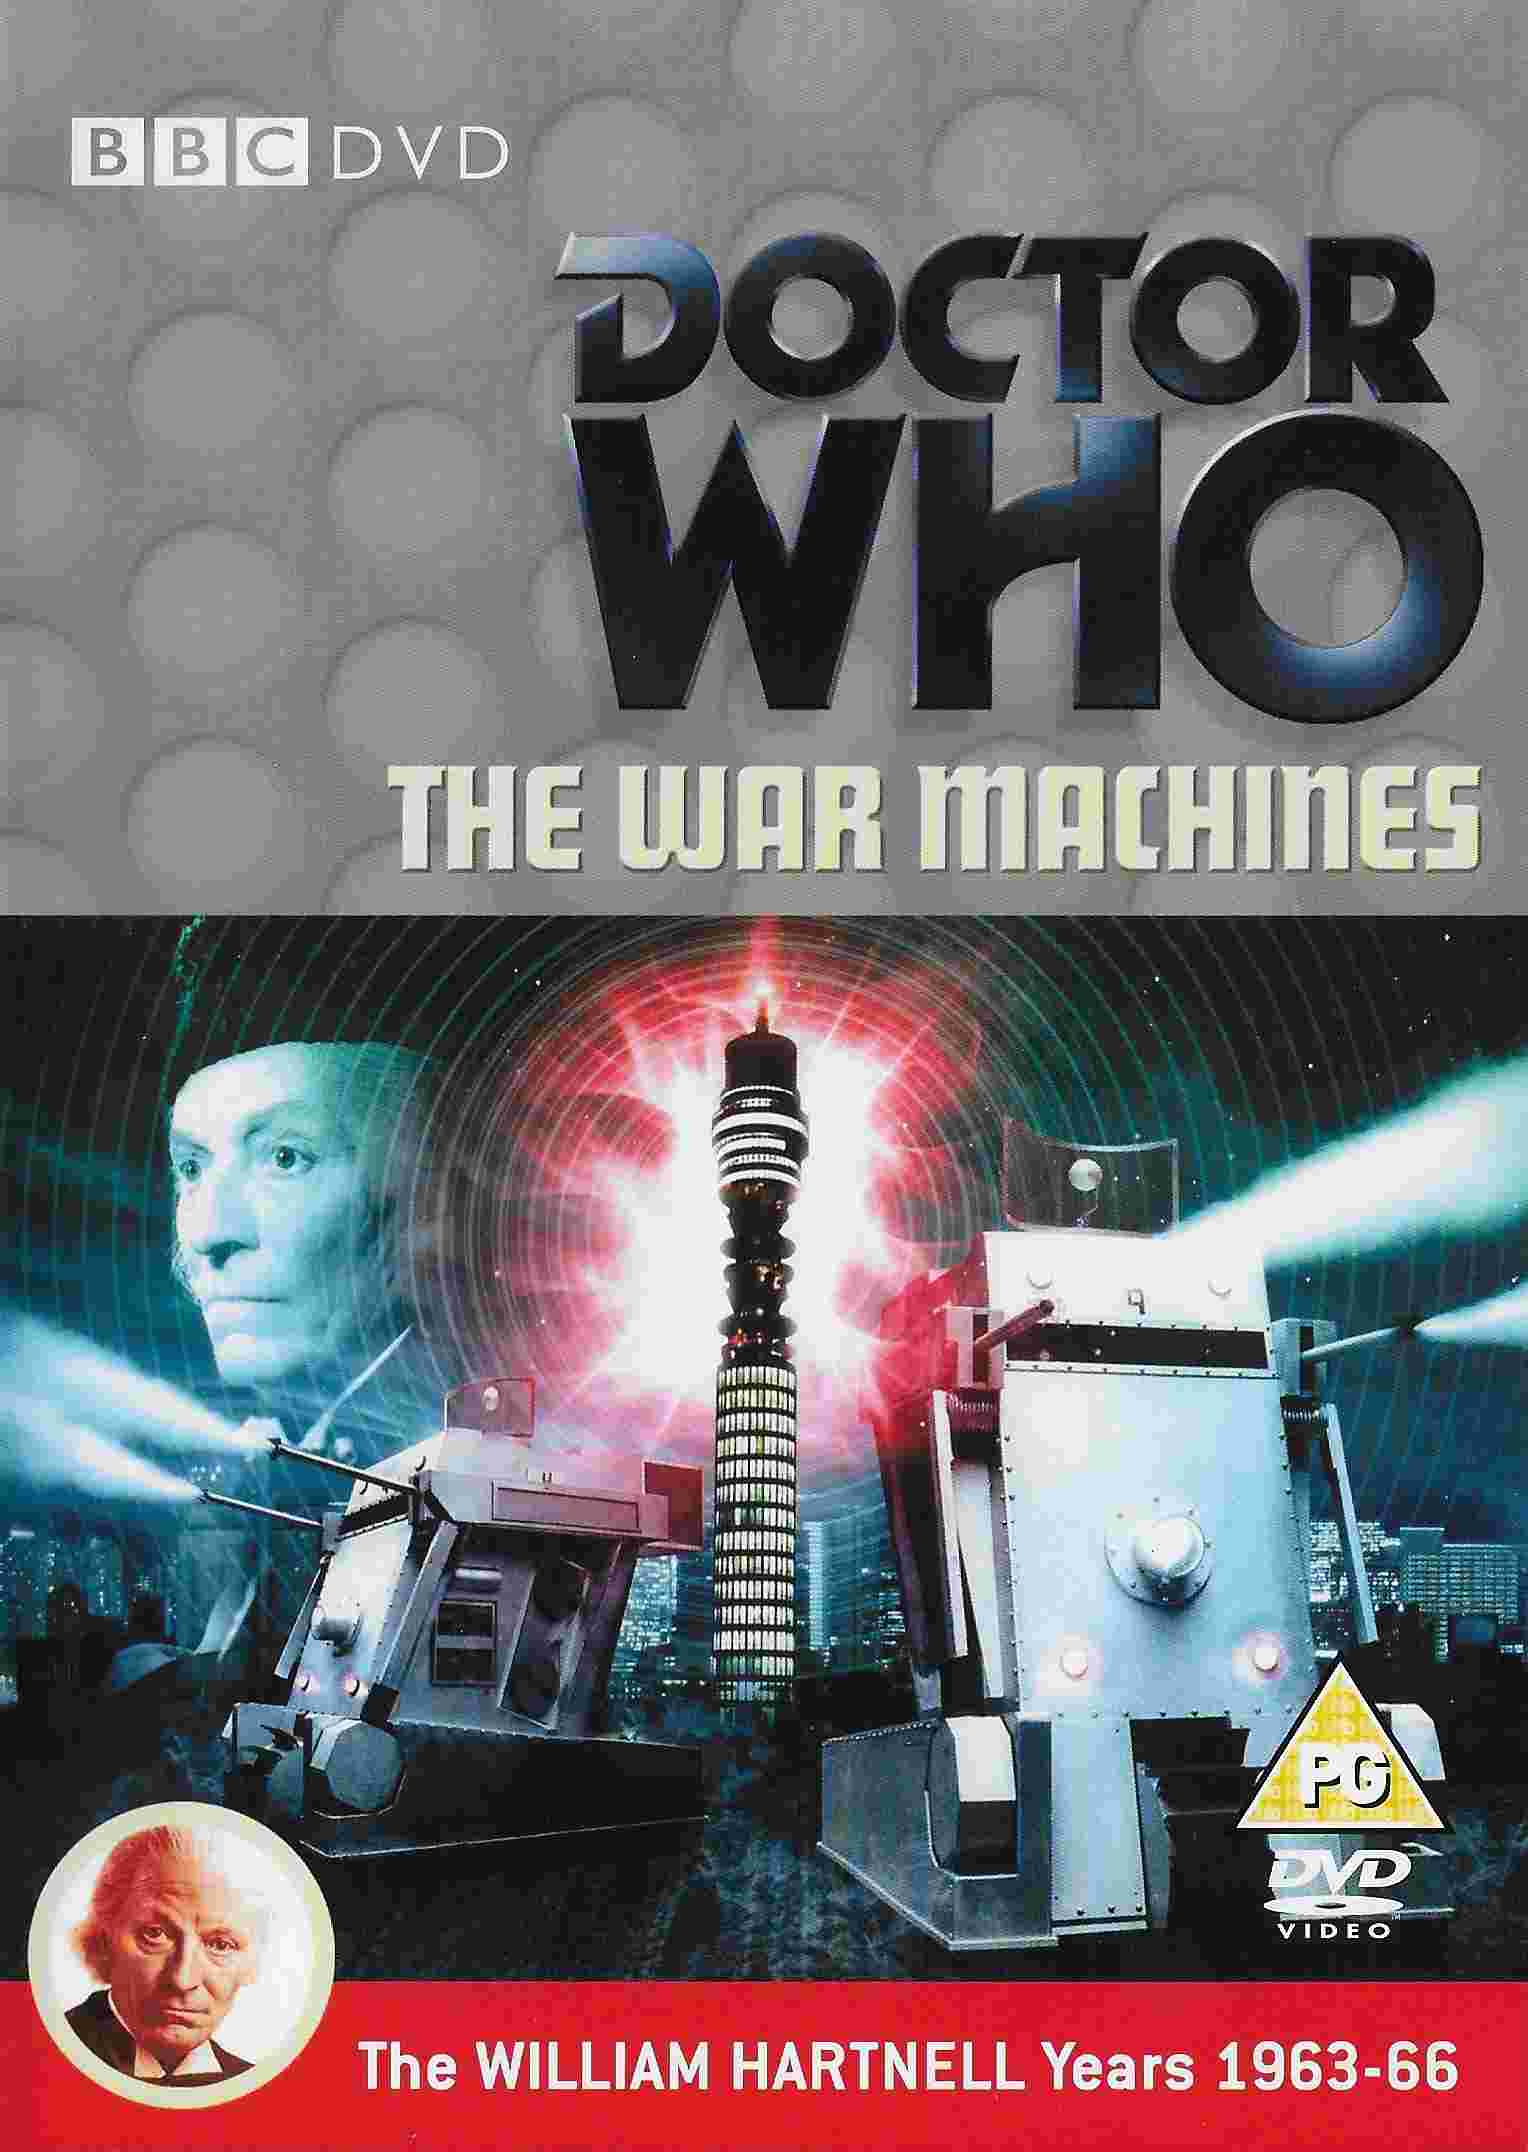 Front cover of BBCDVD 2441